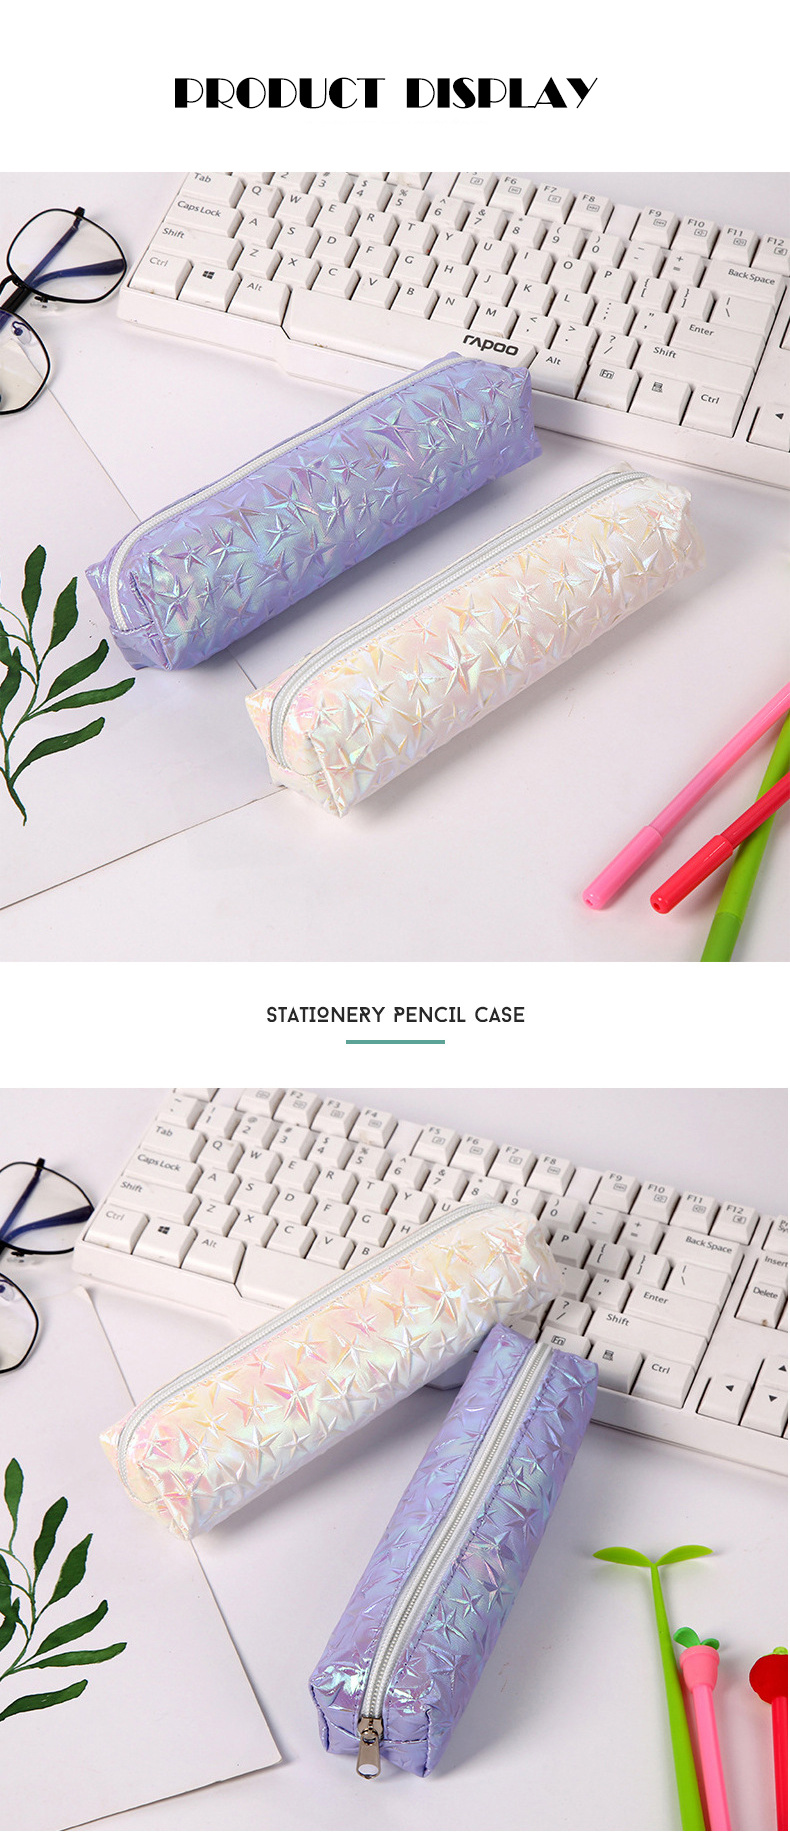 TIESOME Leather Pen Pencil Case, 2PCS Cute Slim Pen Bag Small Pencil Pouch  Lovely Stationery Bag Portable Cosmetic Bag Zipper Bag for Pen Pencils